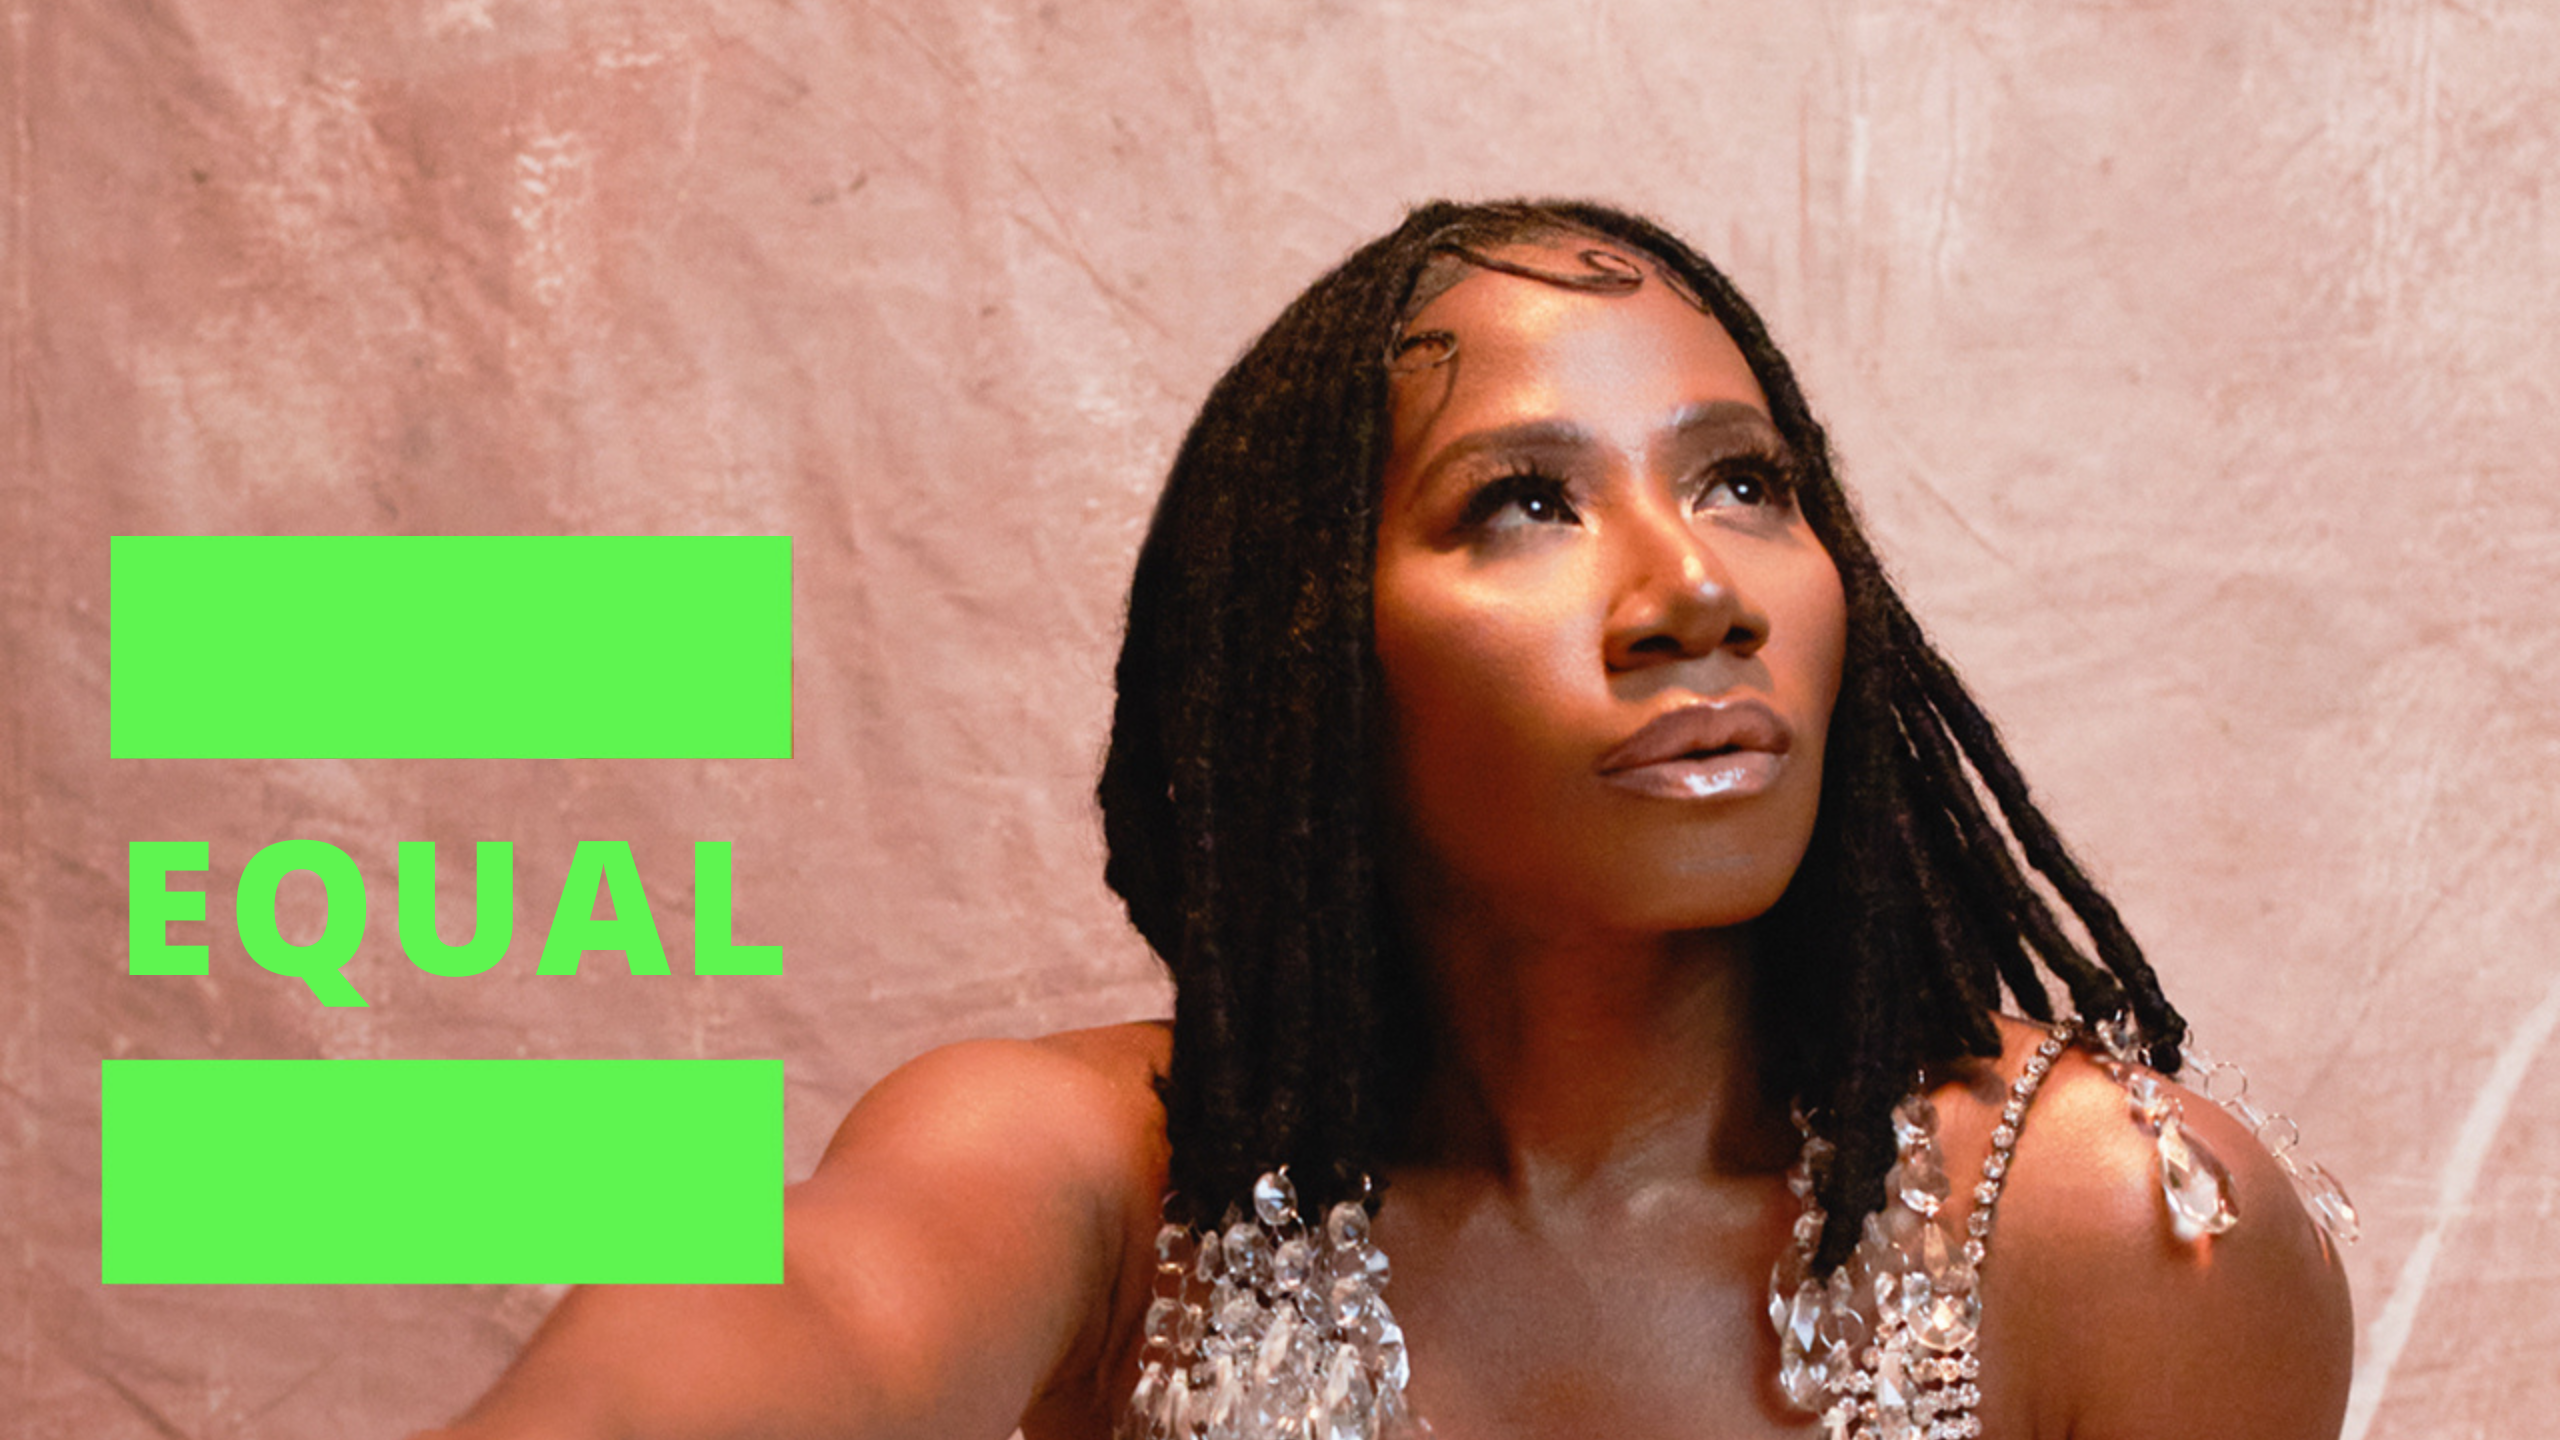 Asa joins Spotify EQUAL Music Programme as ambassador of the month Alt Title: Spotify announces Asa as its EQUAL Global Music Ambassador for February